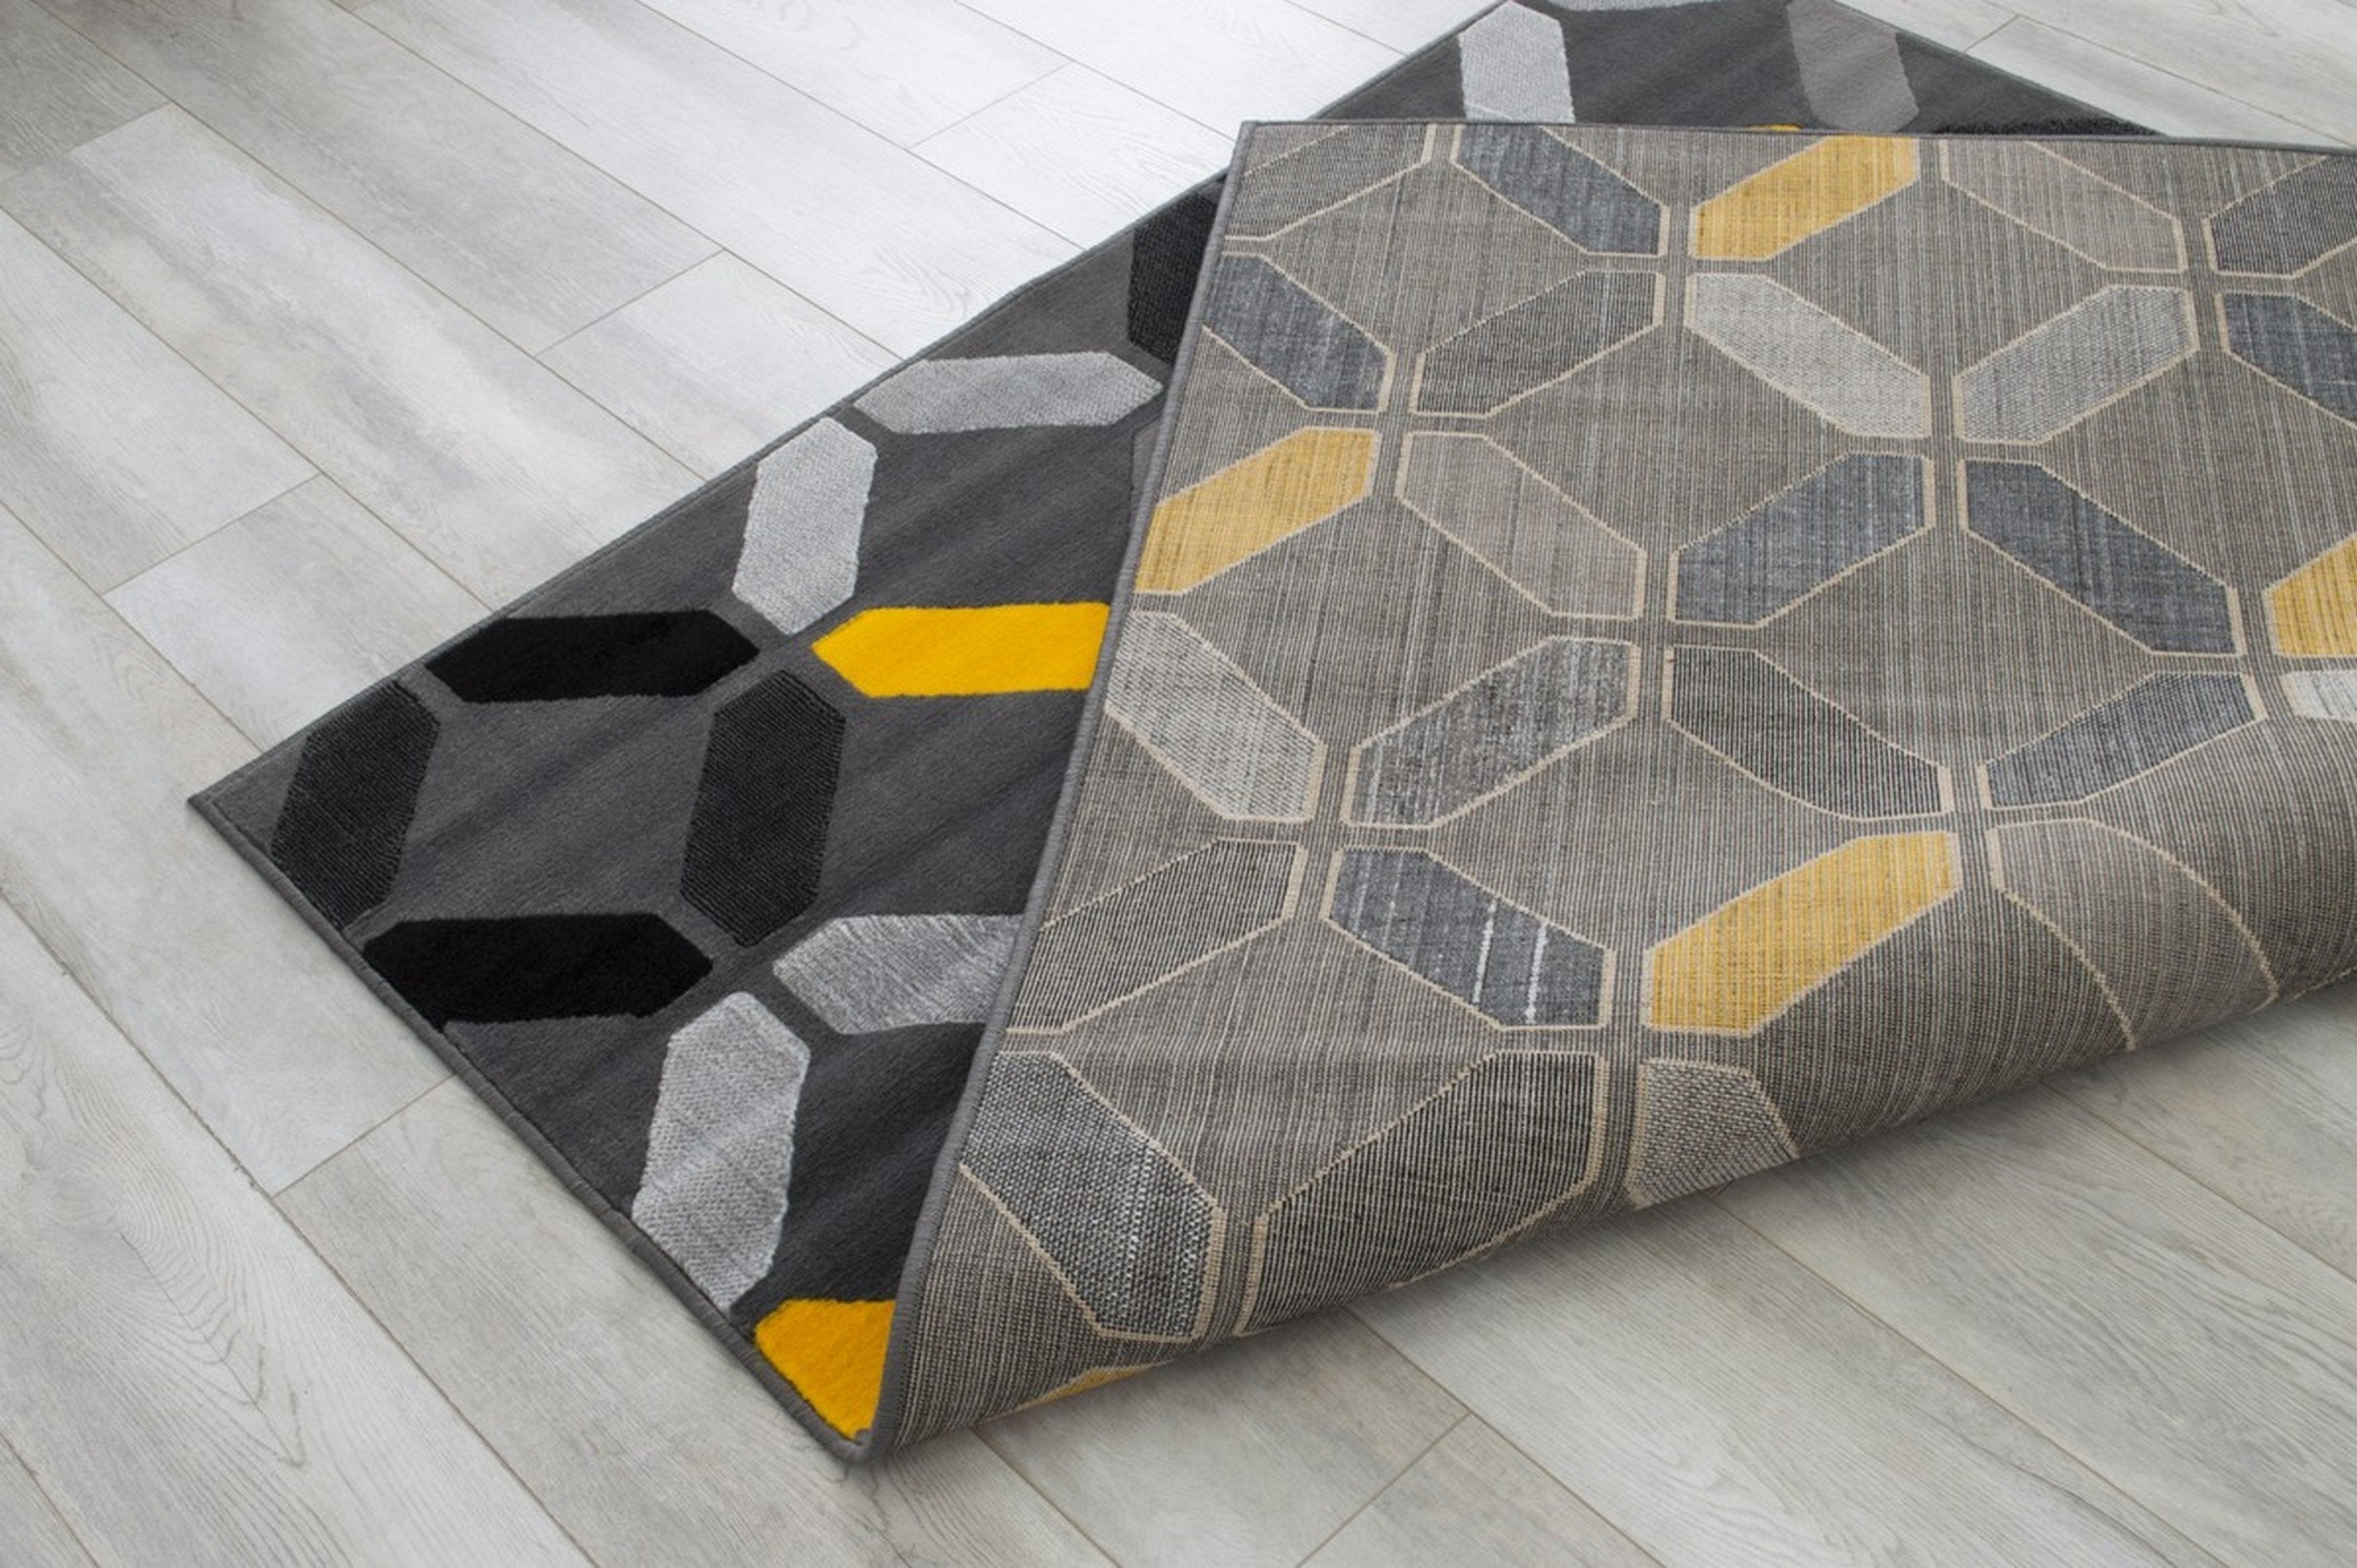 Abstract Area Rug Abstract/Geometric Pattern